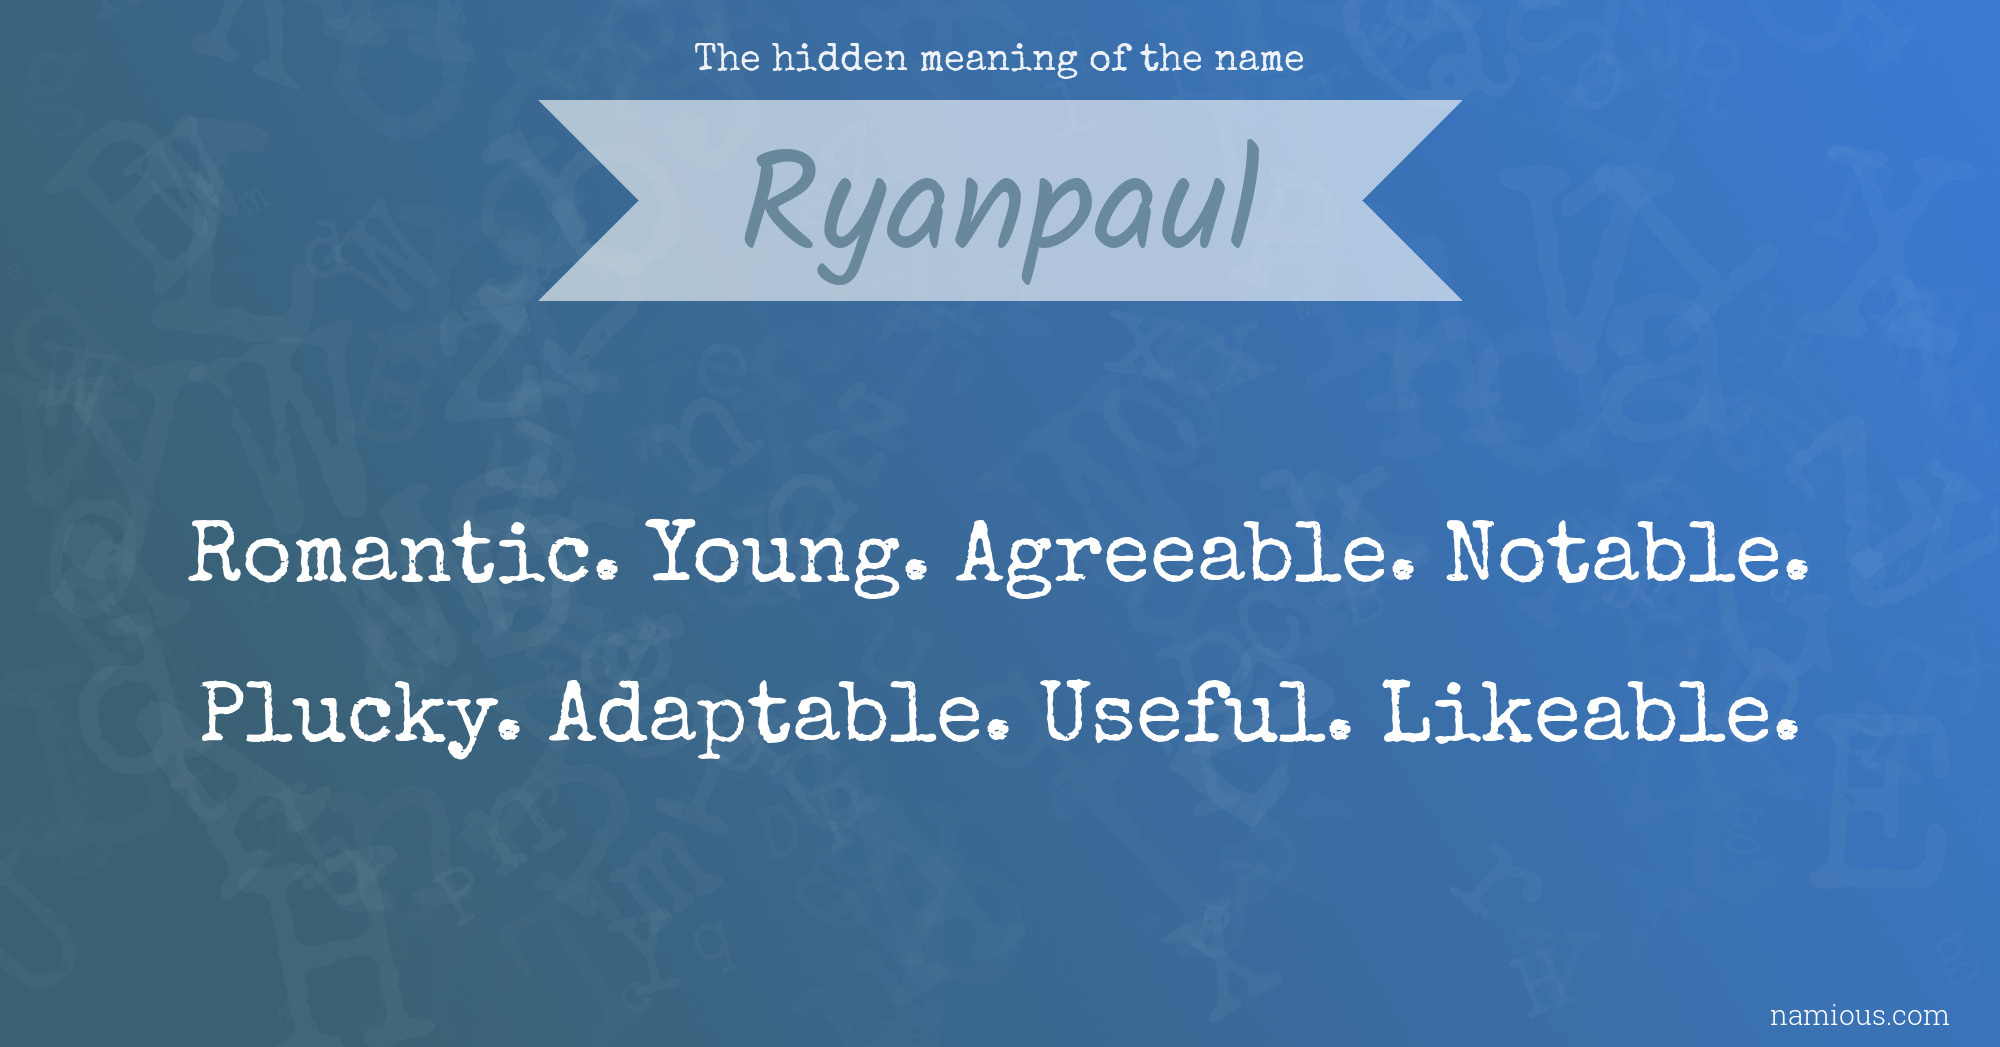 The hidden meaning of the name Ryanpaul